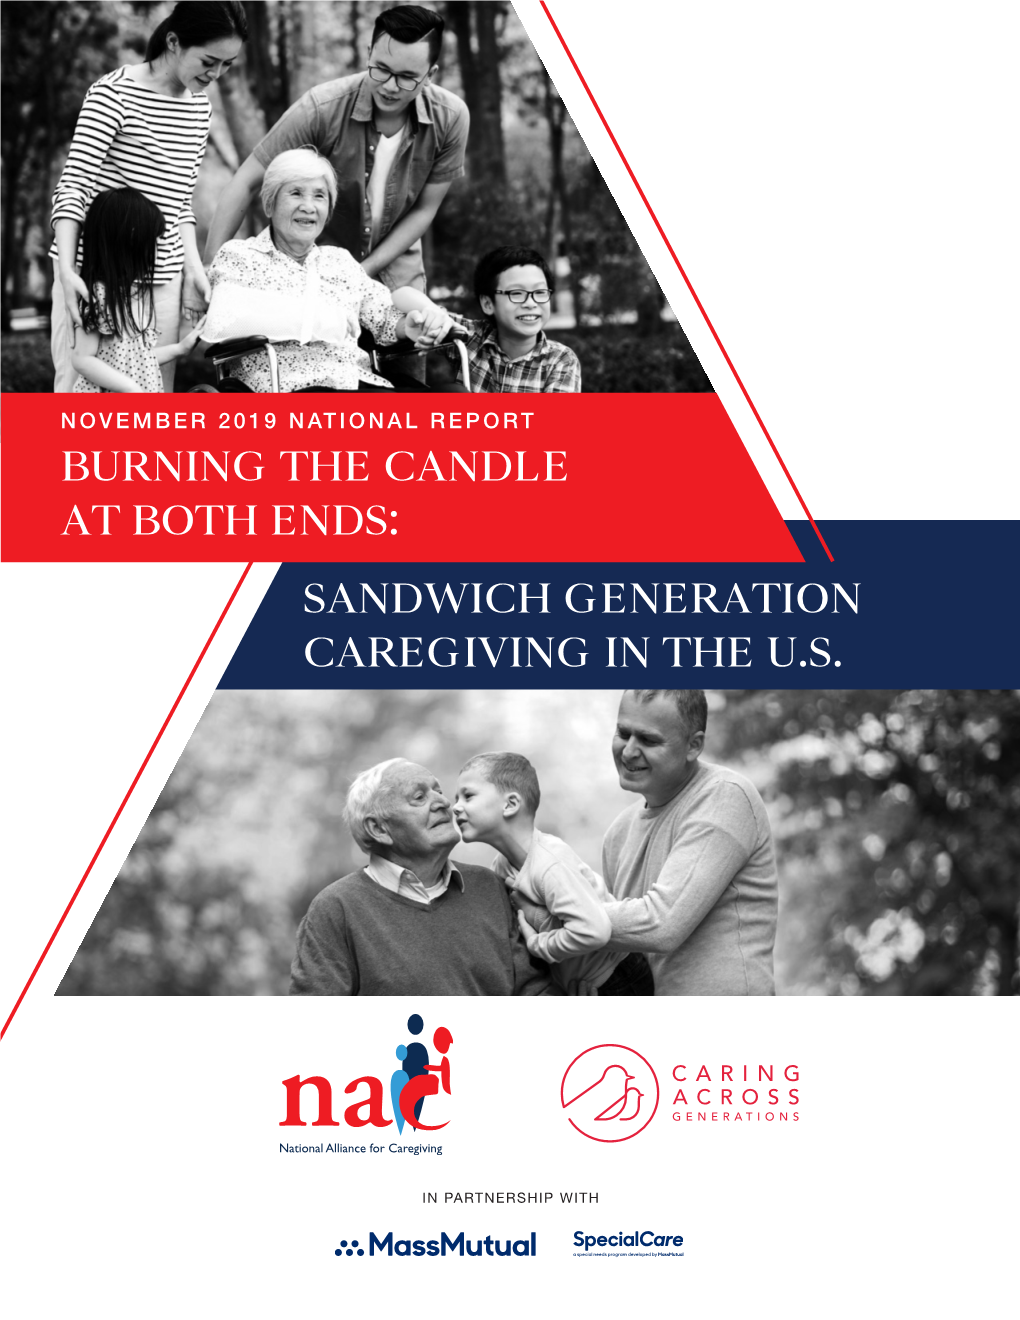 Burning the Candle at Both Ends: Sandwich Generation Caregiving in the U.S